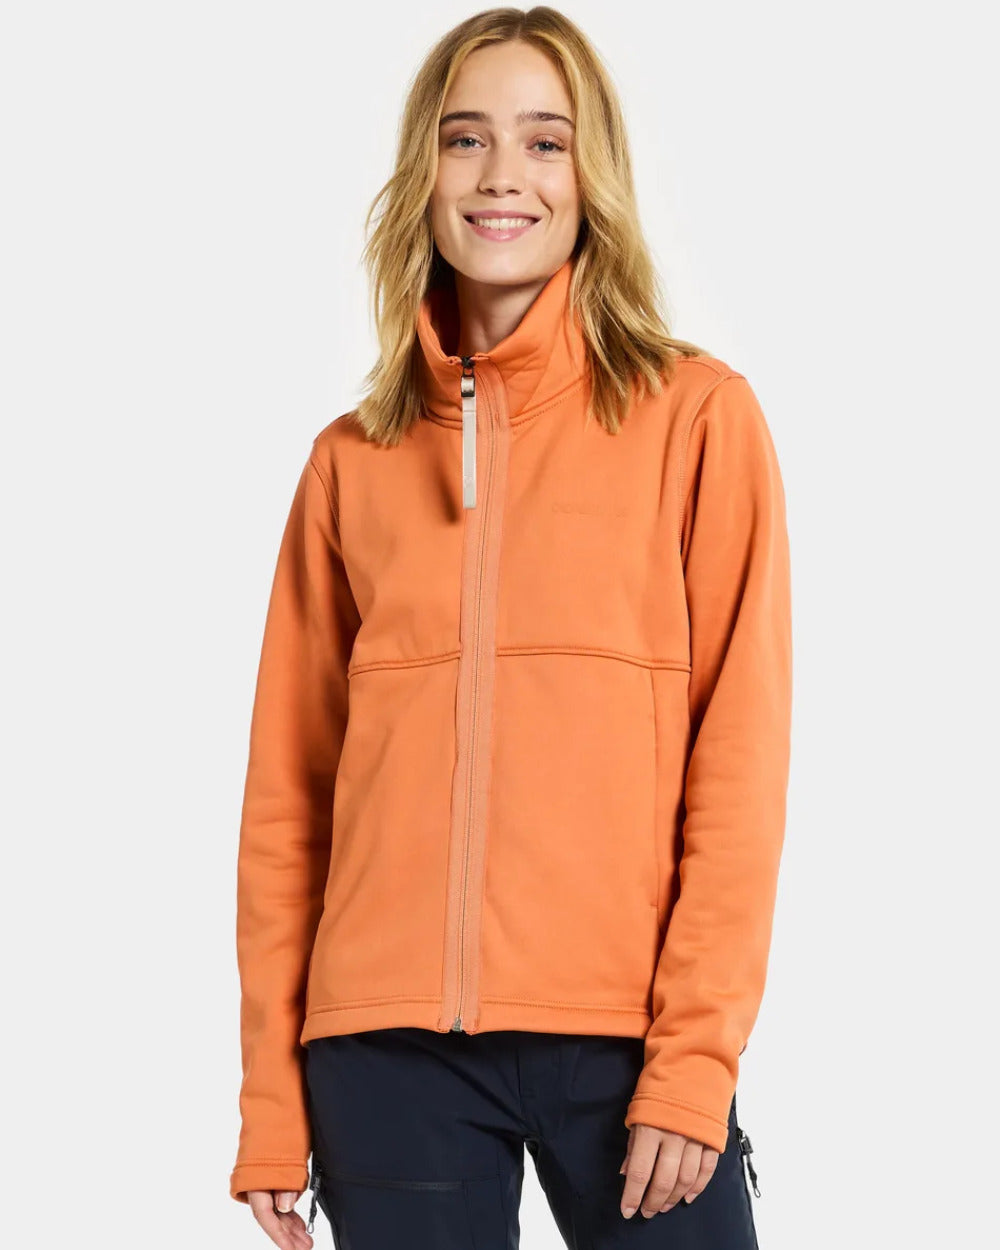 Faded Brique Coloured Didriksons Leah Womens Fullzip On A Grey Background 